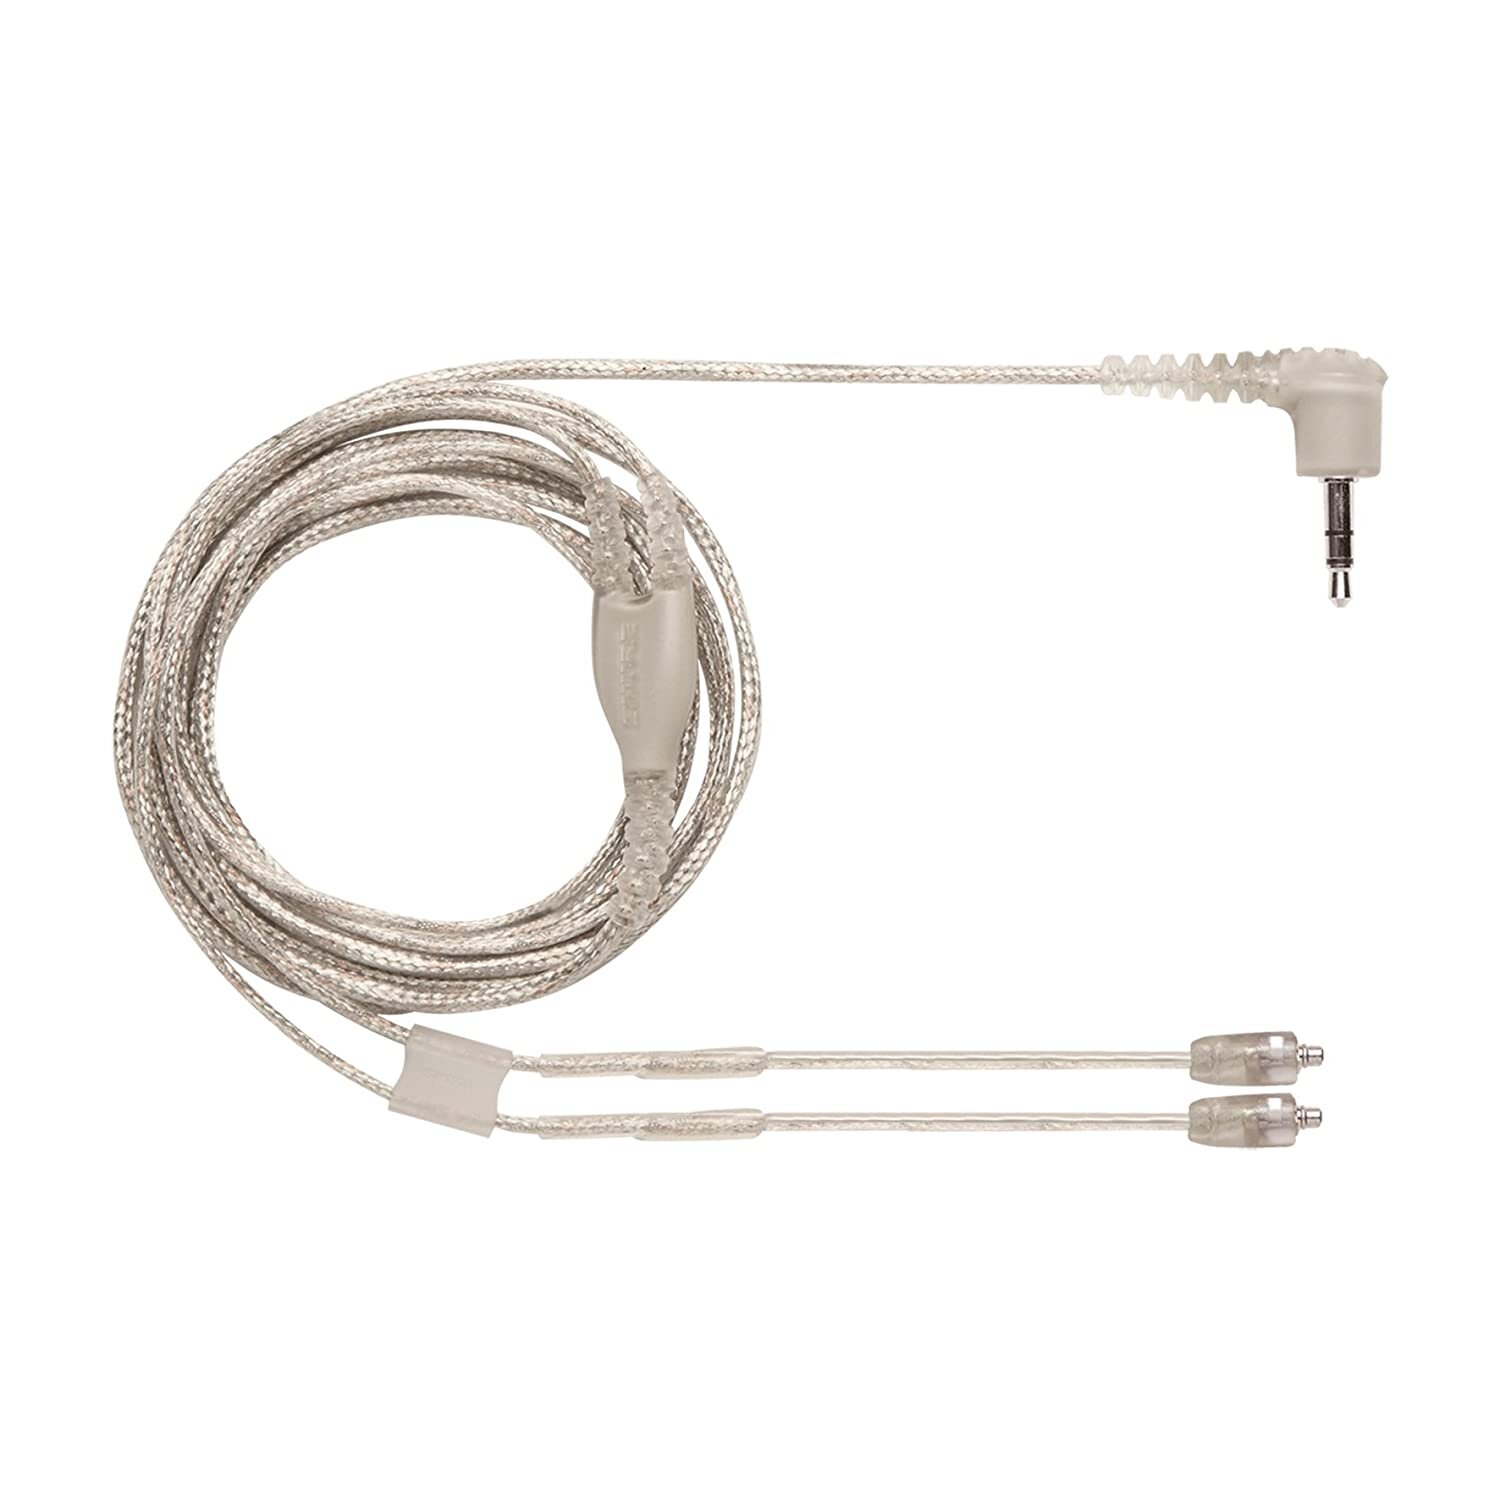 Shure Replacement Detachable Cable 115cm for SE846, Clear / Gray (EAC46CLS) : photo 1